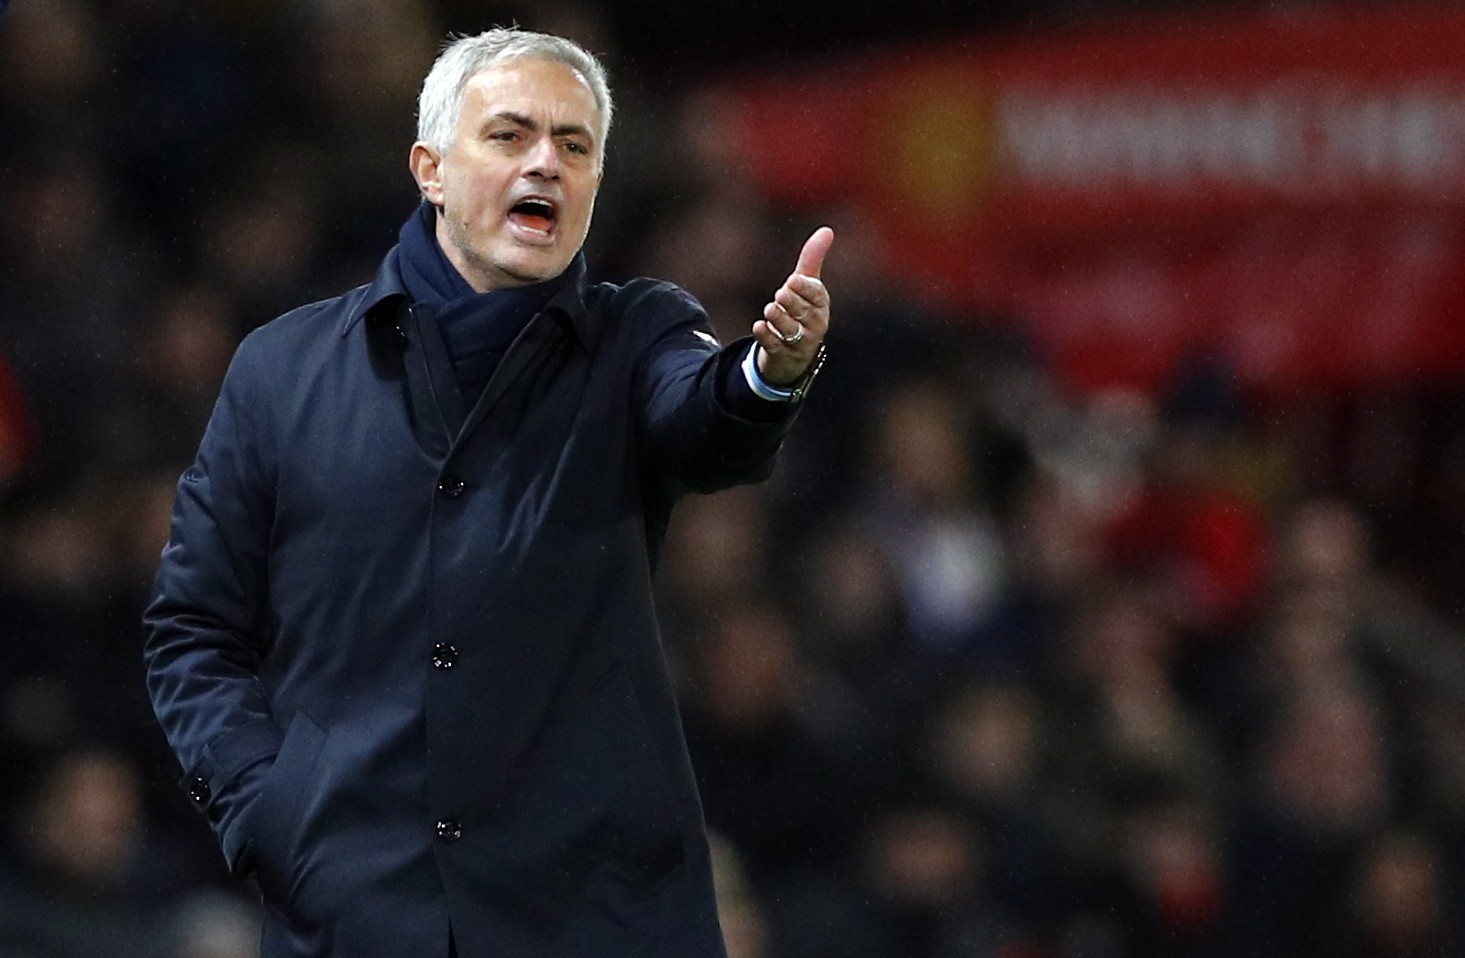 , Jose Mourinho aims dig at Man Utd for pretending injuries as Spurs lose to boss former club